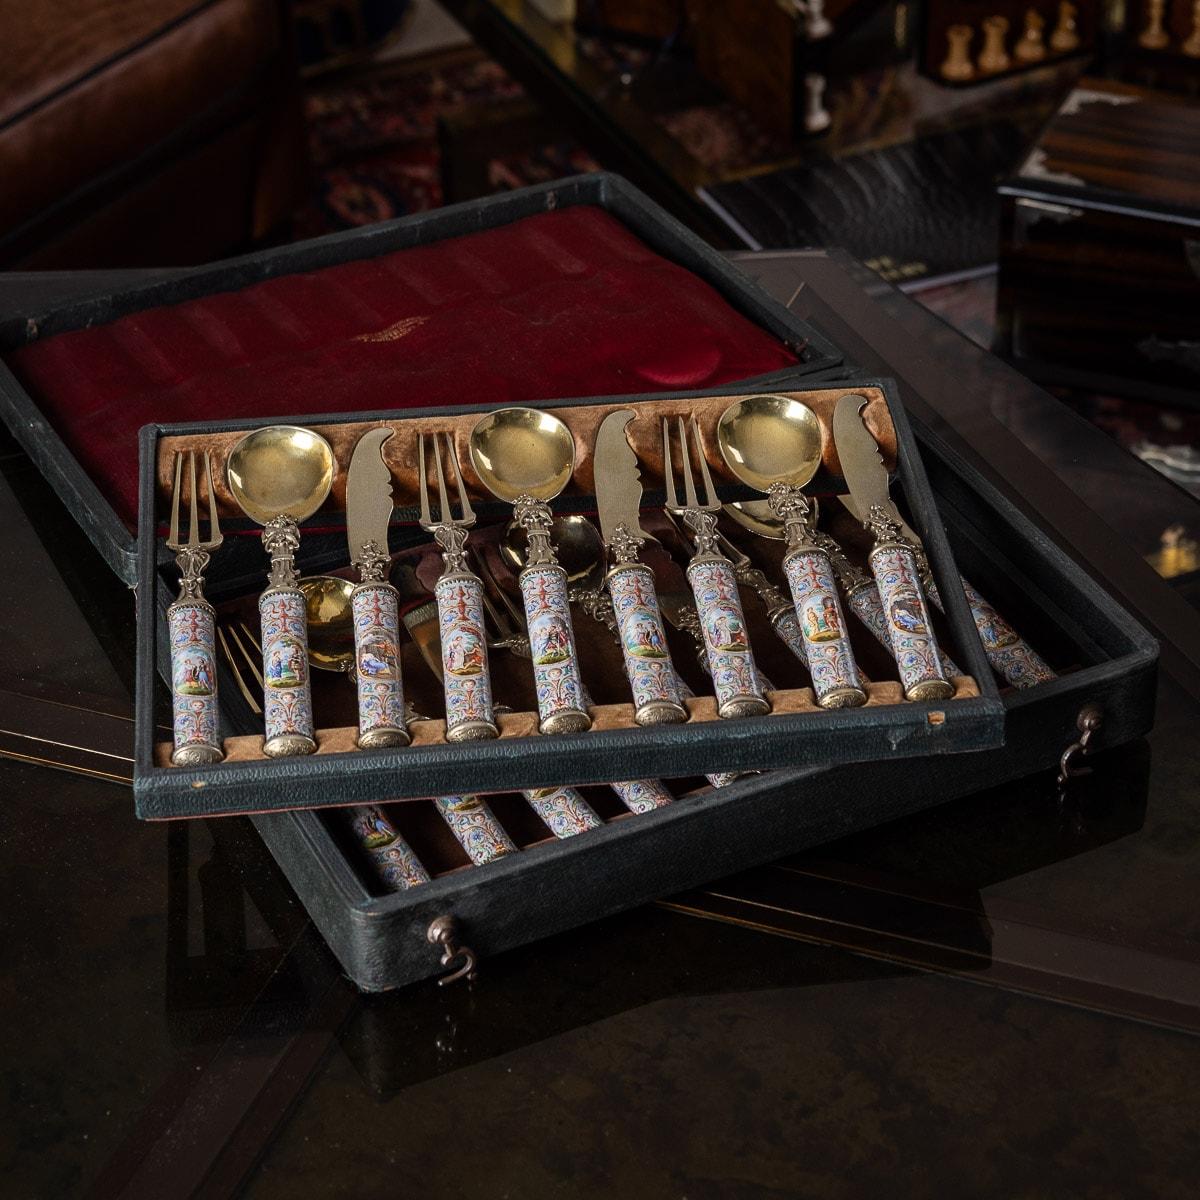 Antique late-19th century Austrian solid silver-gilt and hand painted enamel cutlery set for 6 person, highly decorative and elaborate cast silver-gilt mounted cutlery, set with beautifully hand enameled handles depicting romantic scenes in the